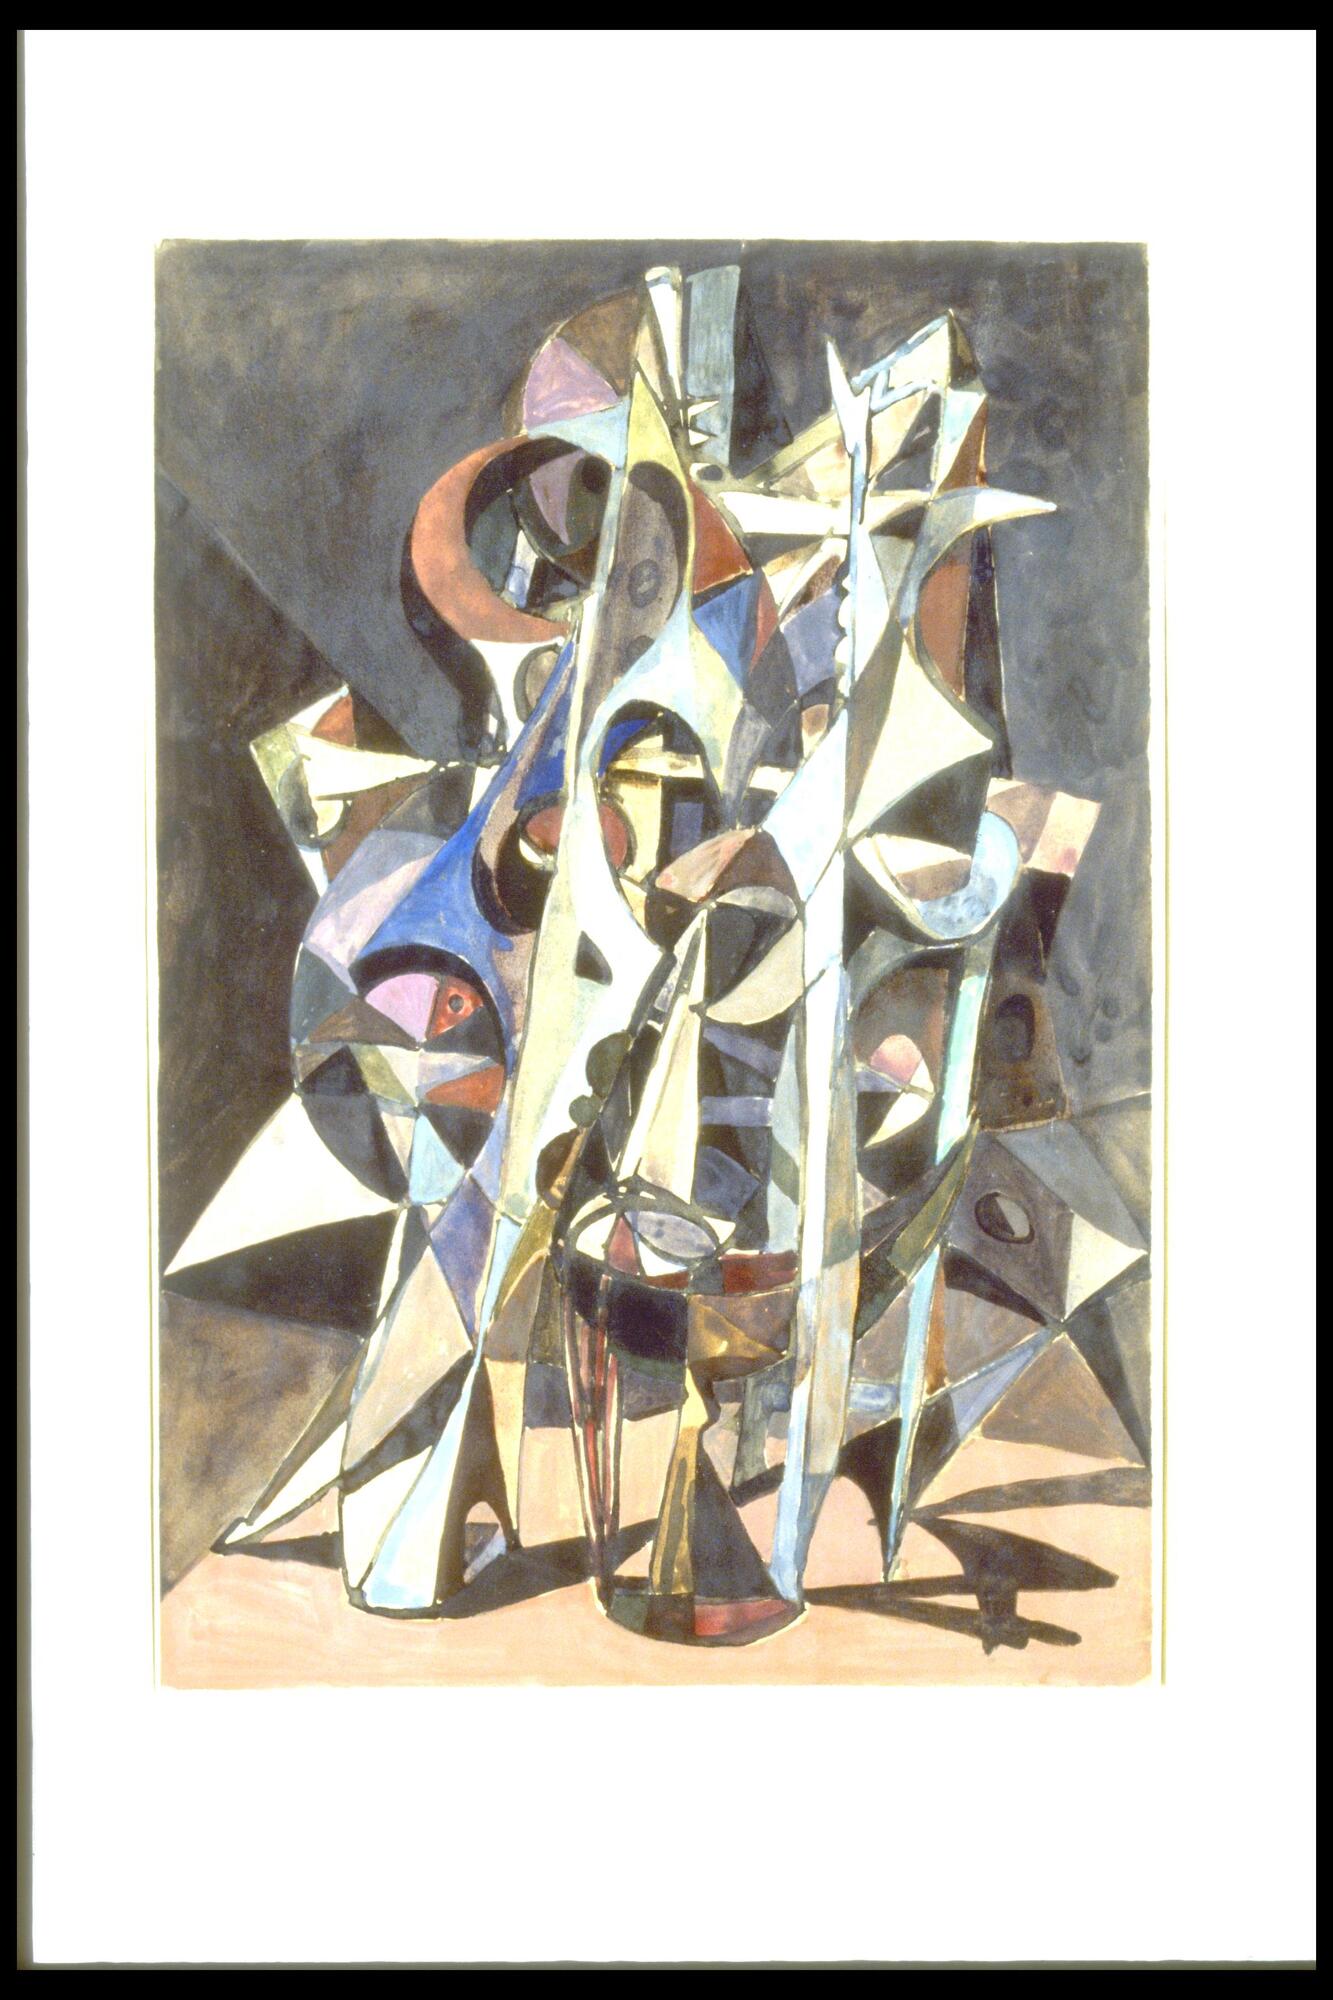 This abstract composition shows a fantastical, surreal structure comprised of angular shapes in many colors. A shadow is cast on the brown surface upon which the structure stands. 